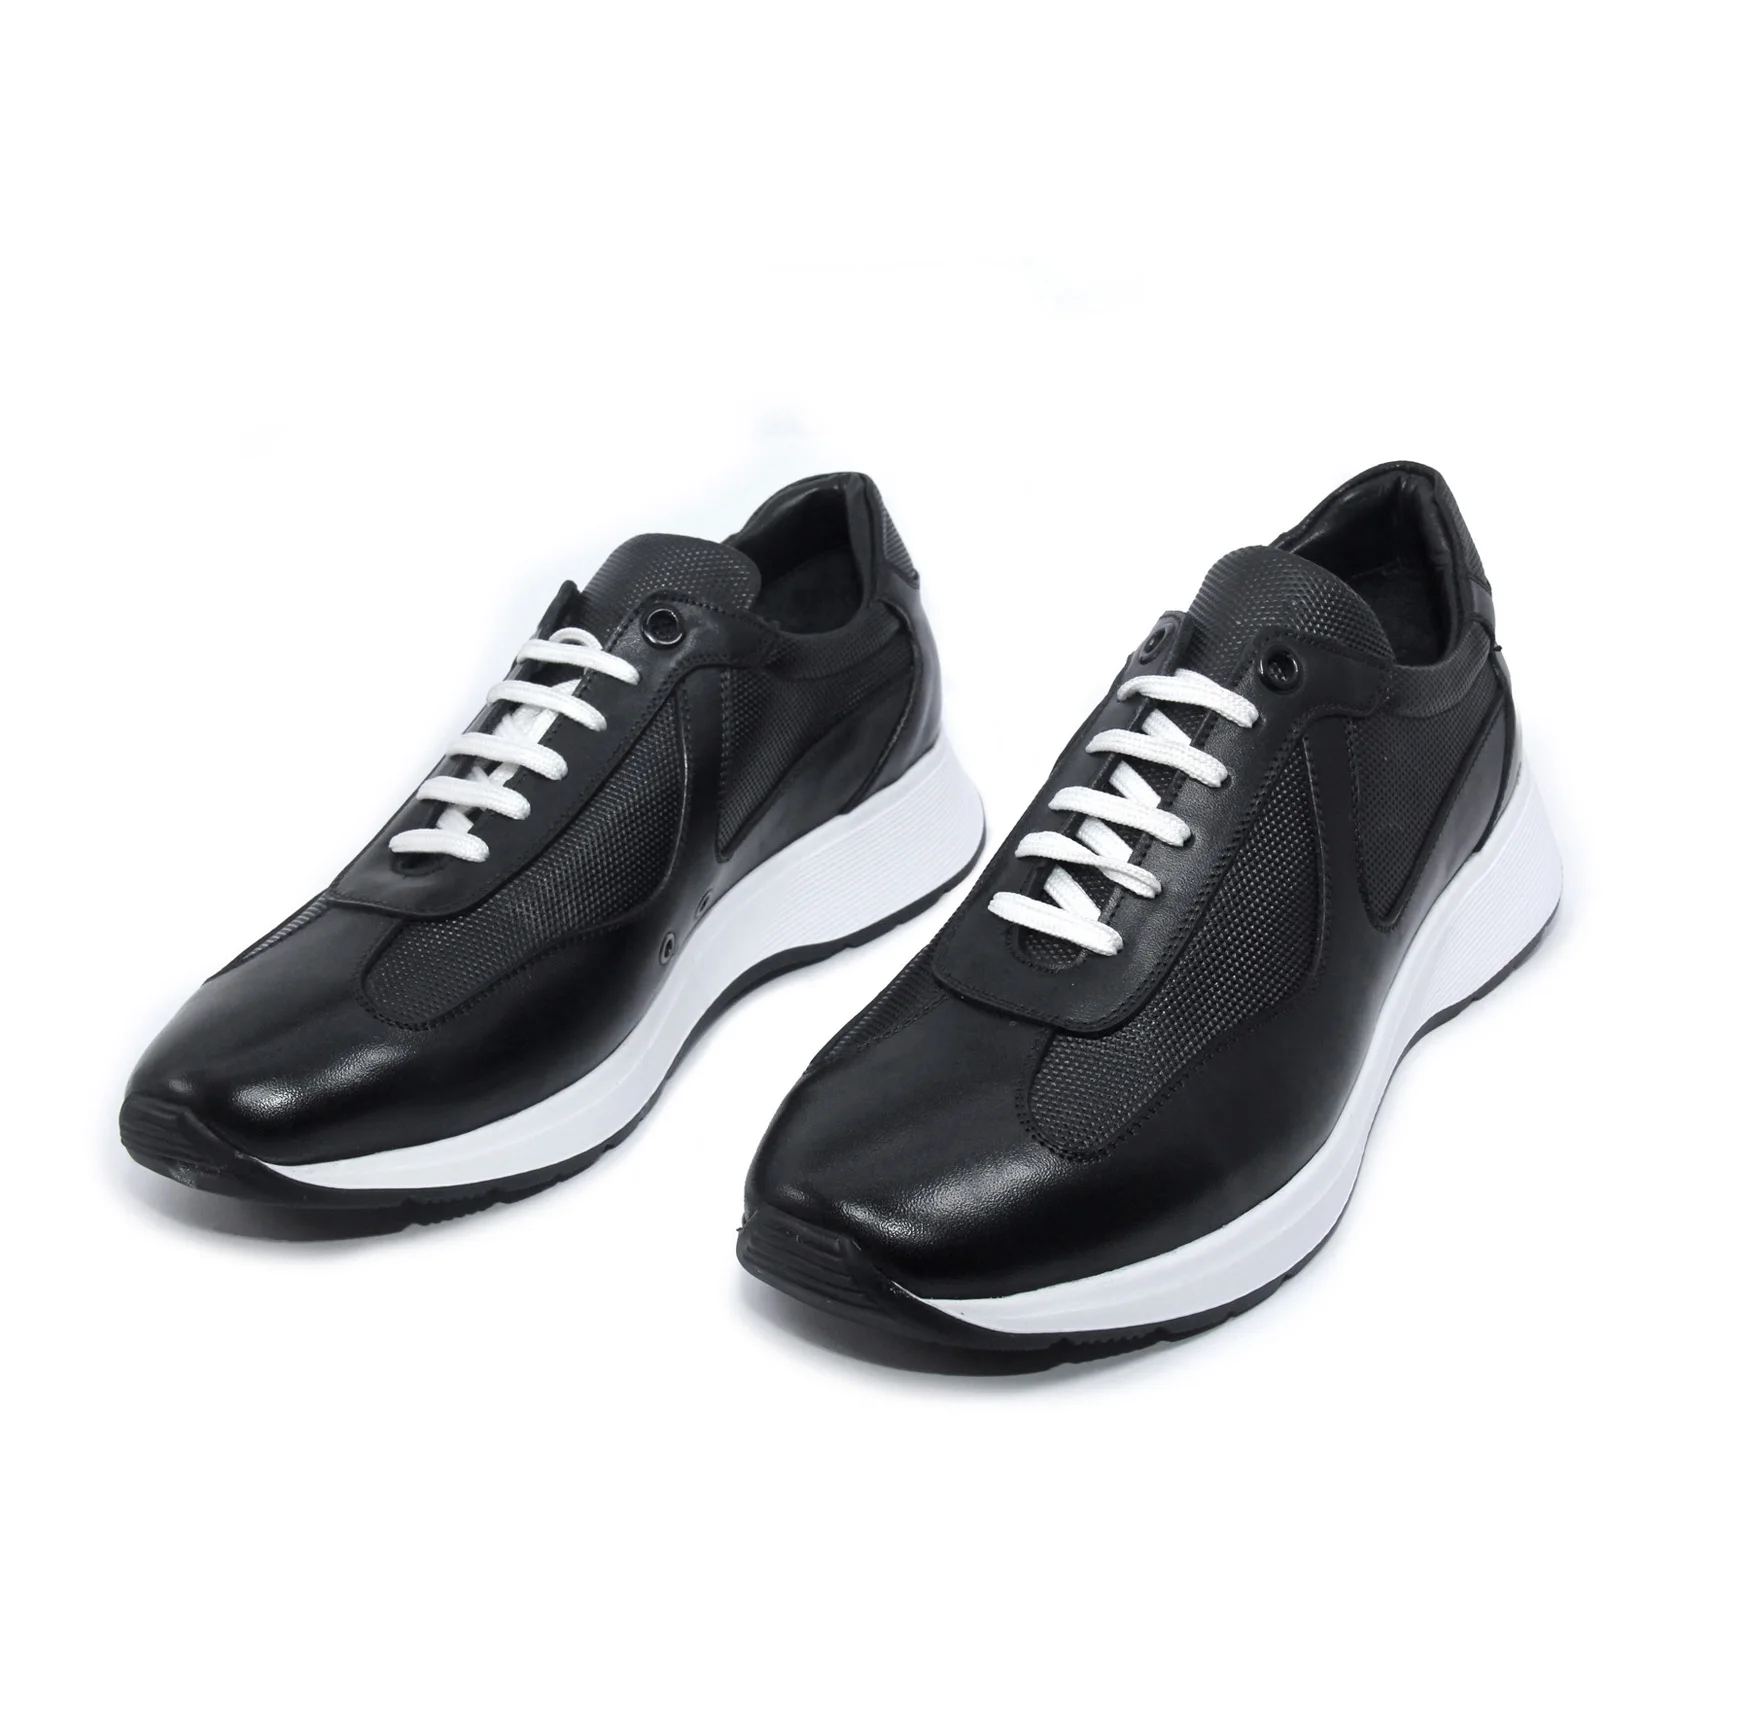 

Handmade Black Sport Running Shoes with Genuine Cow Leather, Natural Calf Skin, Lightweight EVA Sole, Men's Casual Footwear